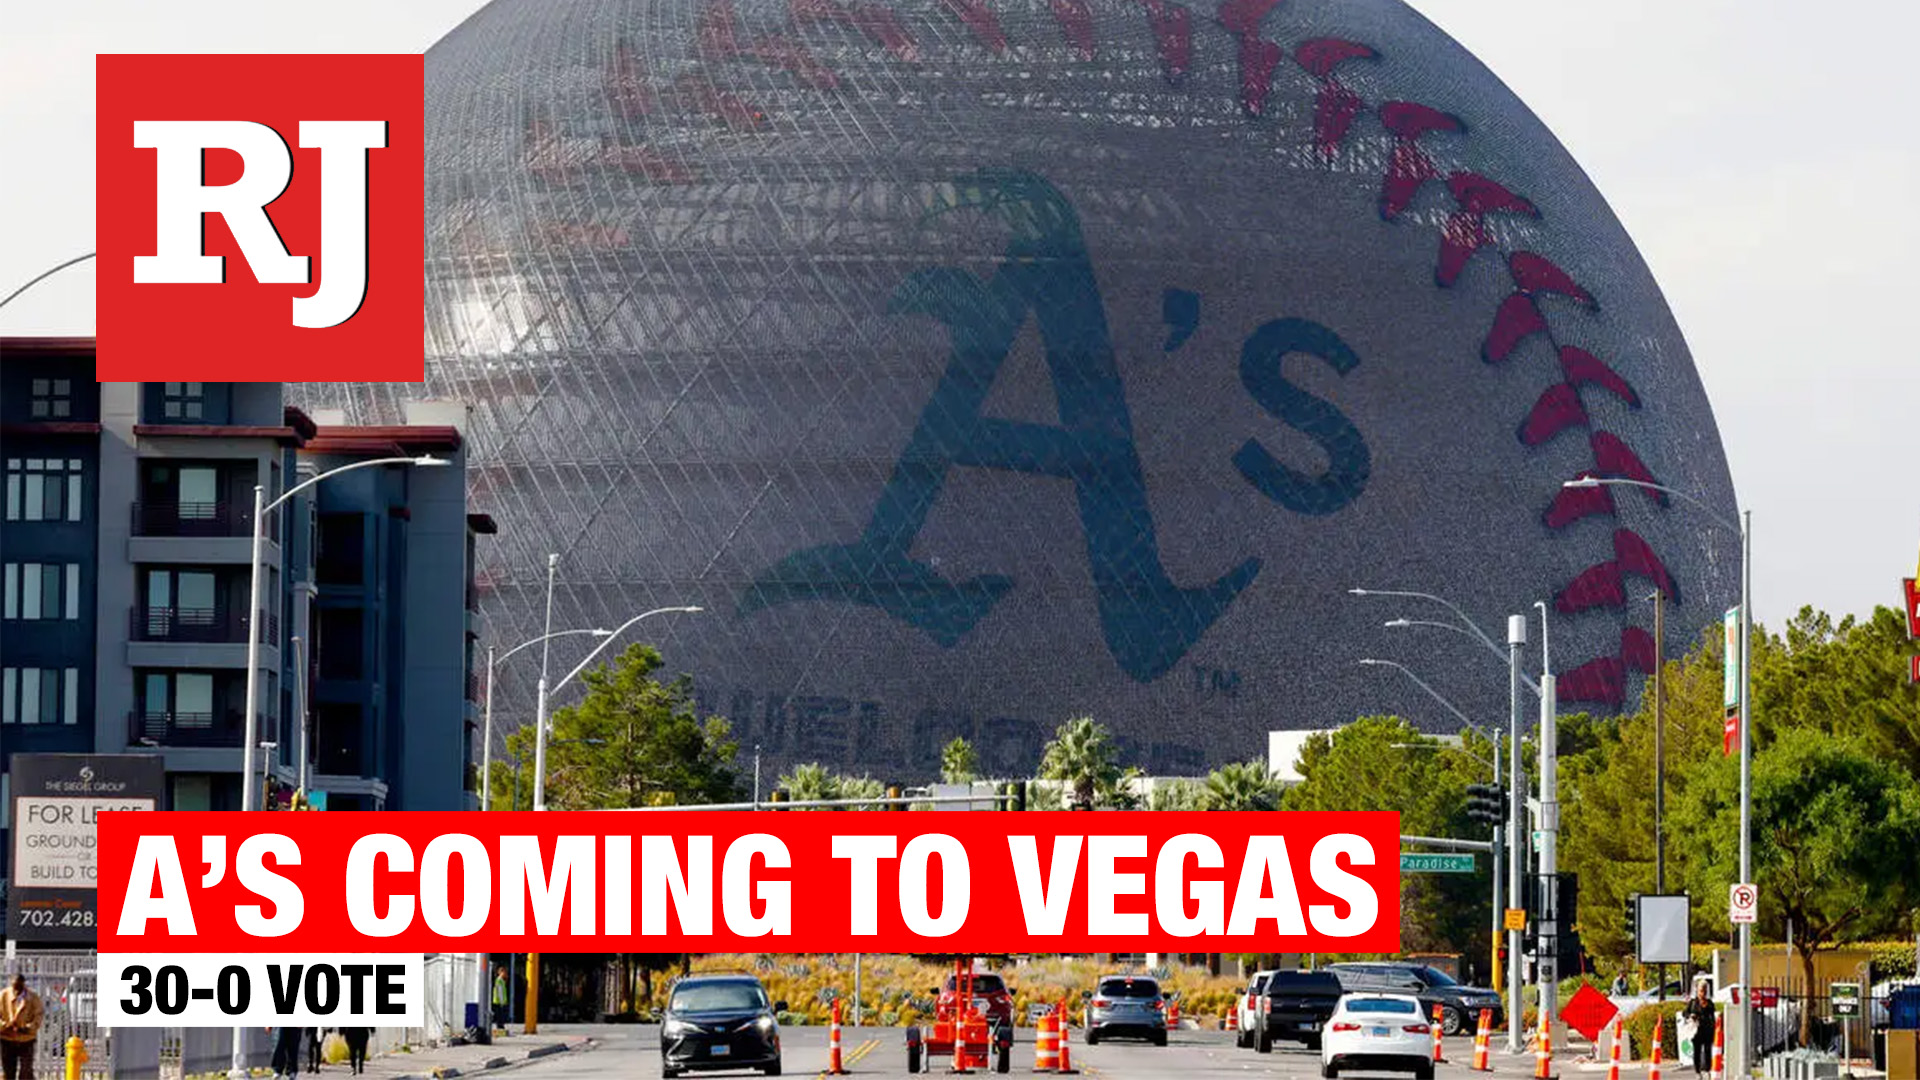 A's coming to Las Vegas with 30-0 vote